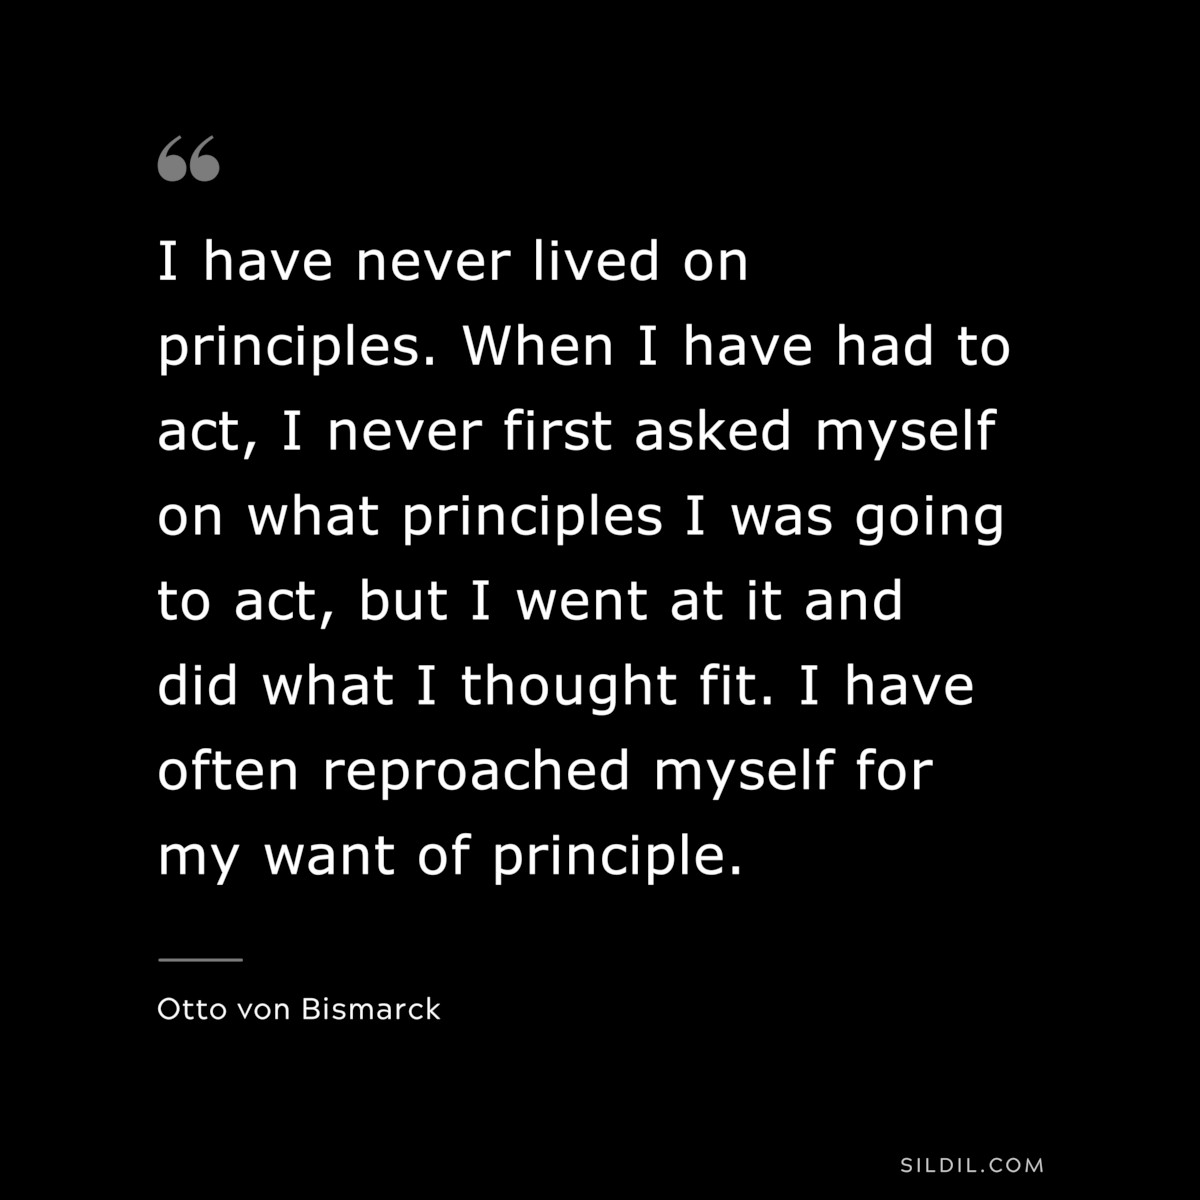 I have never lived on principles. When I have had to act, I never first asked myself on what principles I was going to act, but I went at it and did what I thought fit. I have often reproached myself for my want of principle. ― Otto von Bismarck